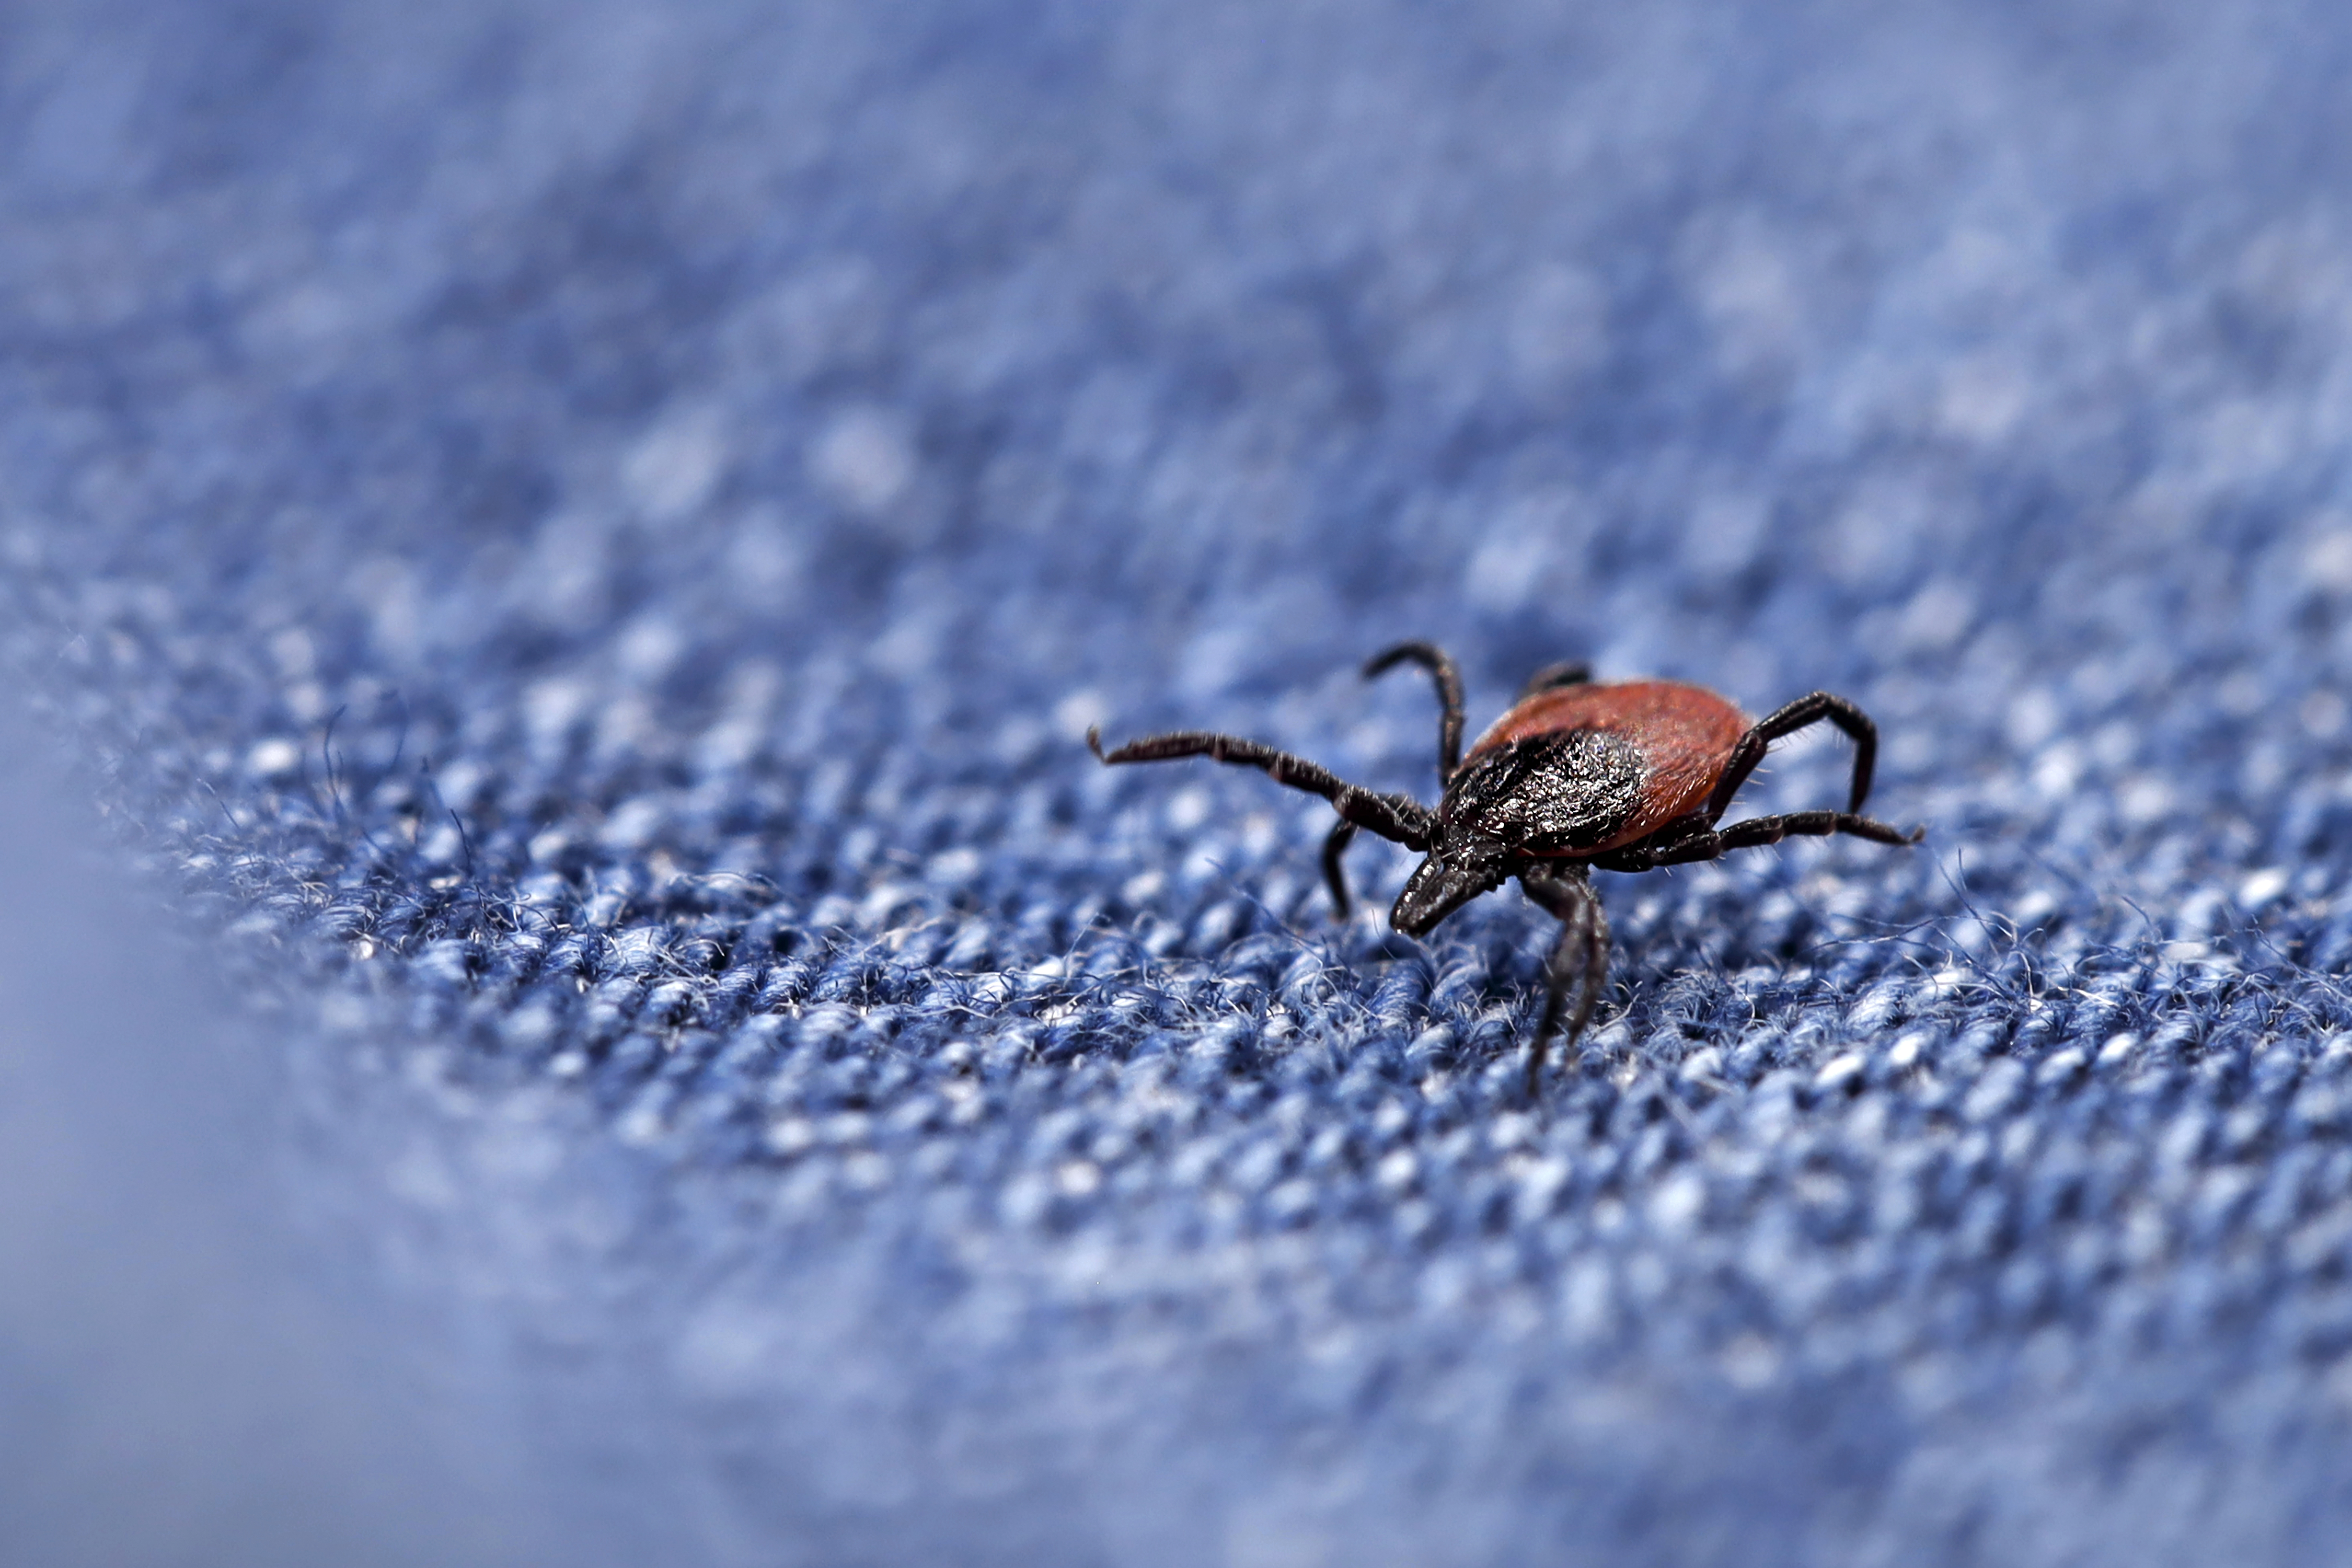 DRIVE TIME: Tick spray made of ant pheromones might ward off bites